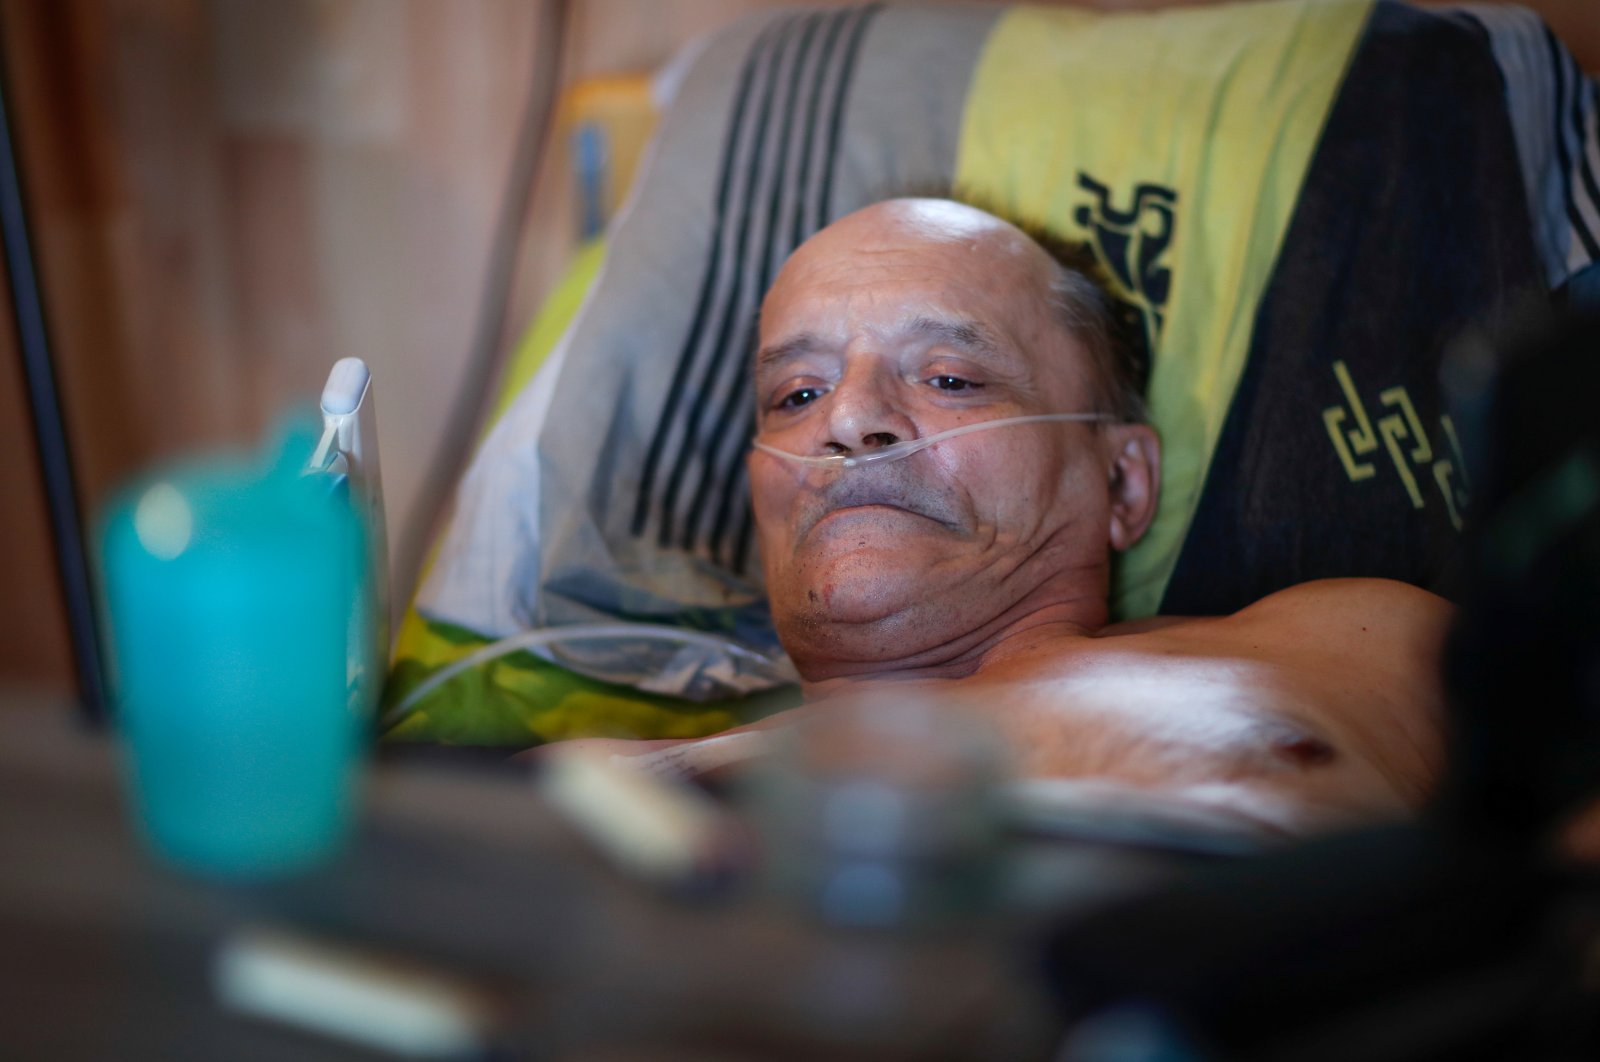 Alain Cocq, 57, in the medical bed he has been confined to for years as a result of a degenerative disease that has no treatment, poses after an interview with Reuters at his home in Dijon, France, Aug. 19, 2020. (Reuters Photo)